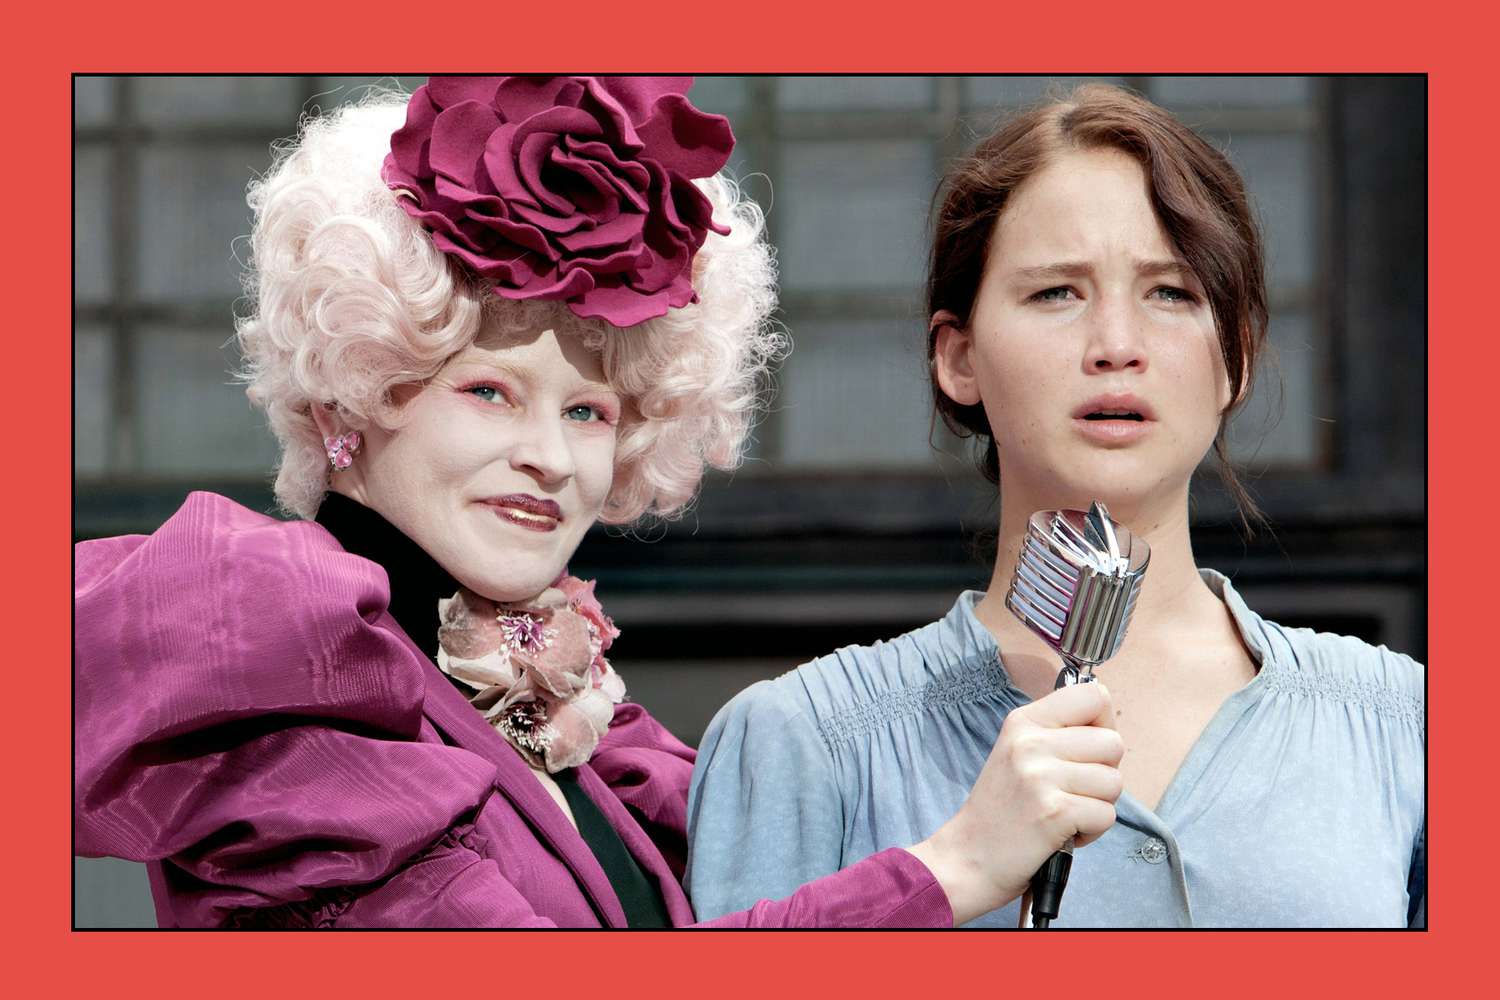 'The Hunger Games' cast: See where Jennifer Lawrence, Josh Hutcherson, and more actors are now